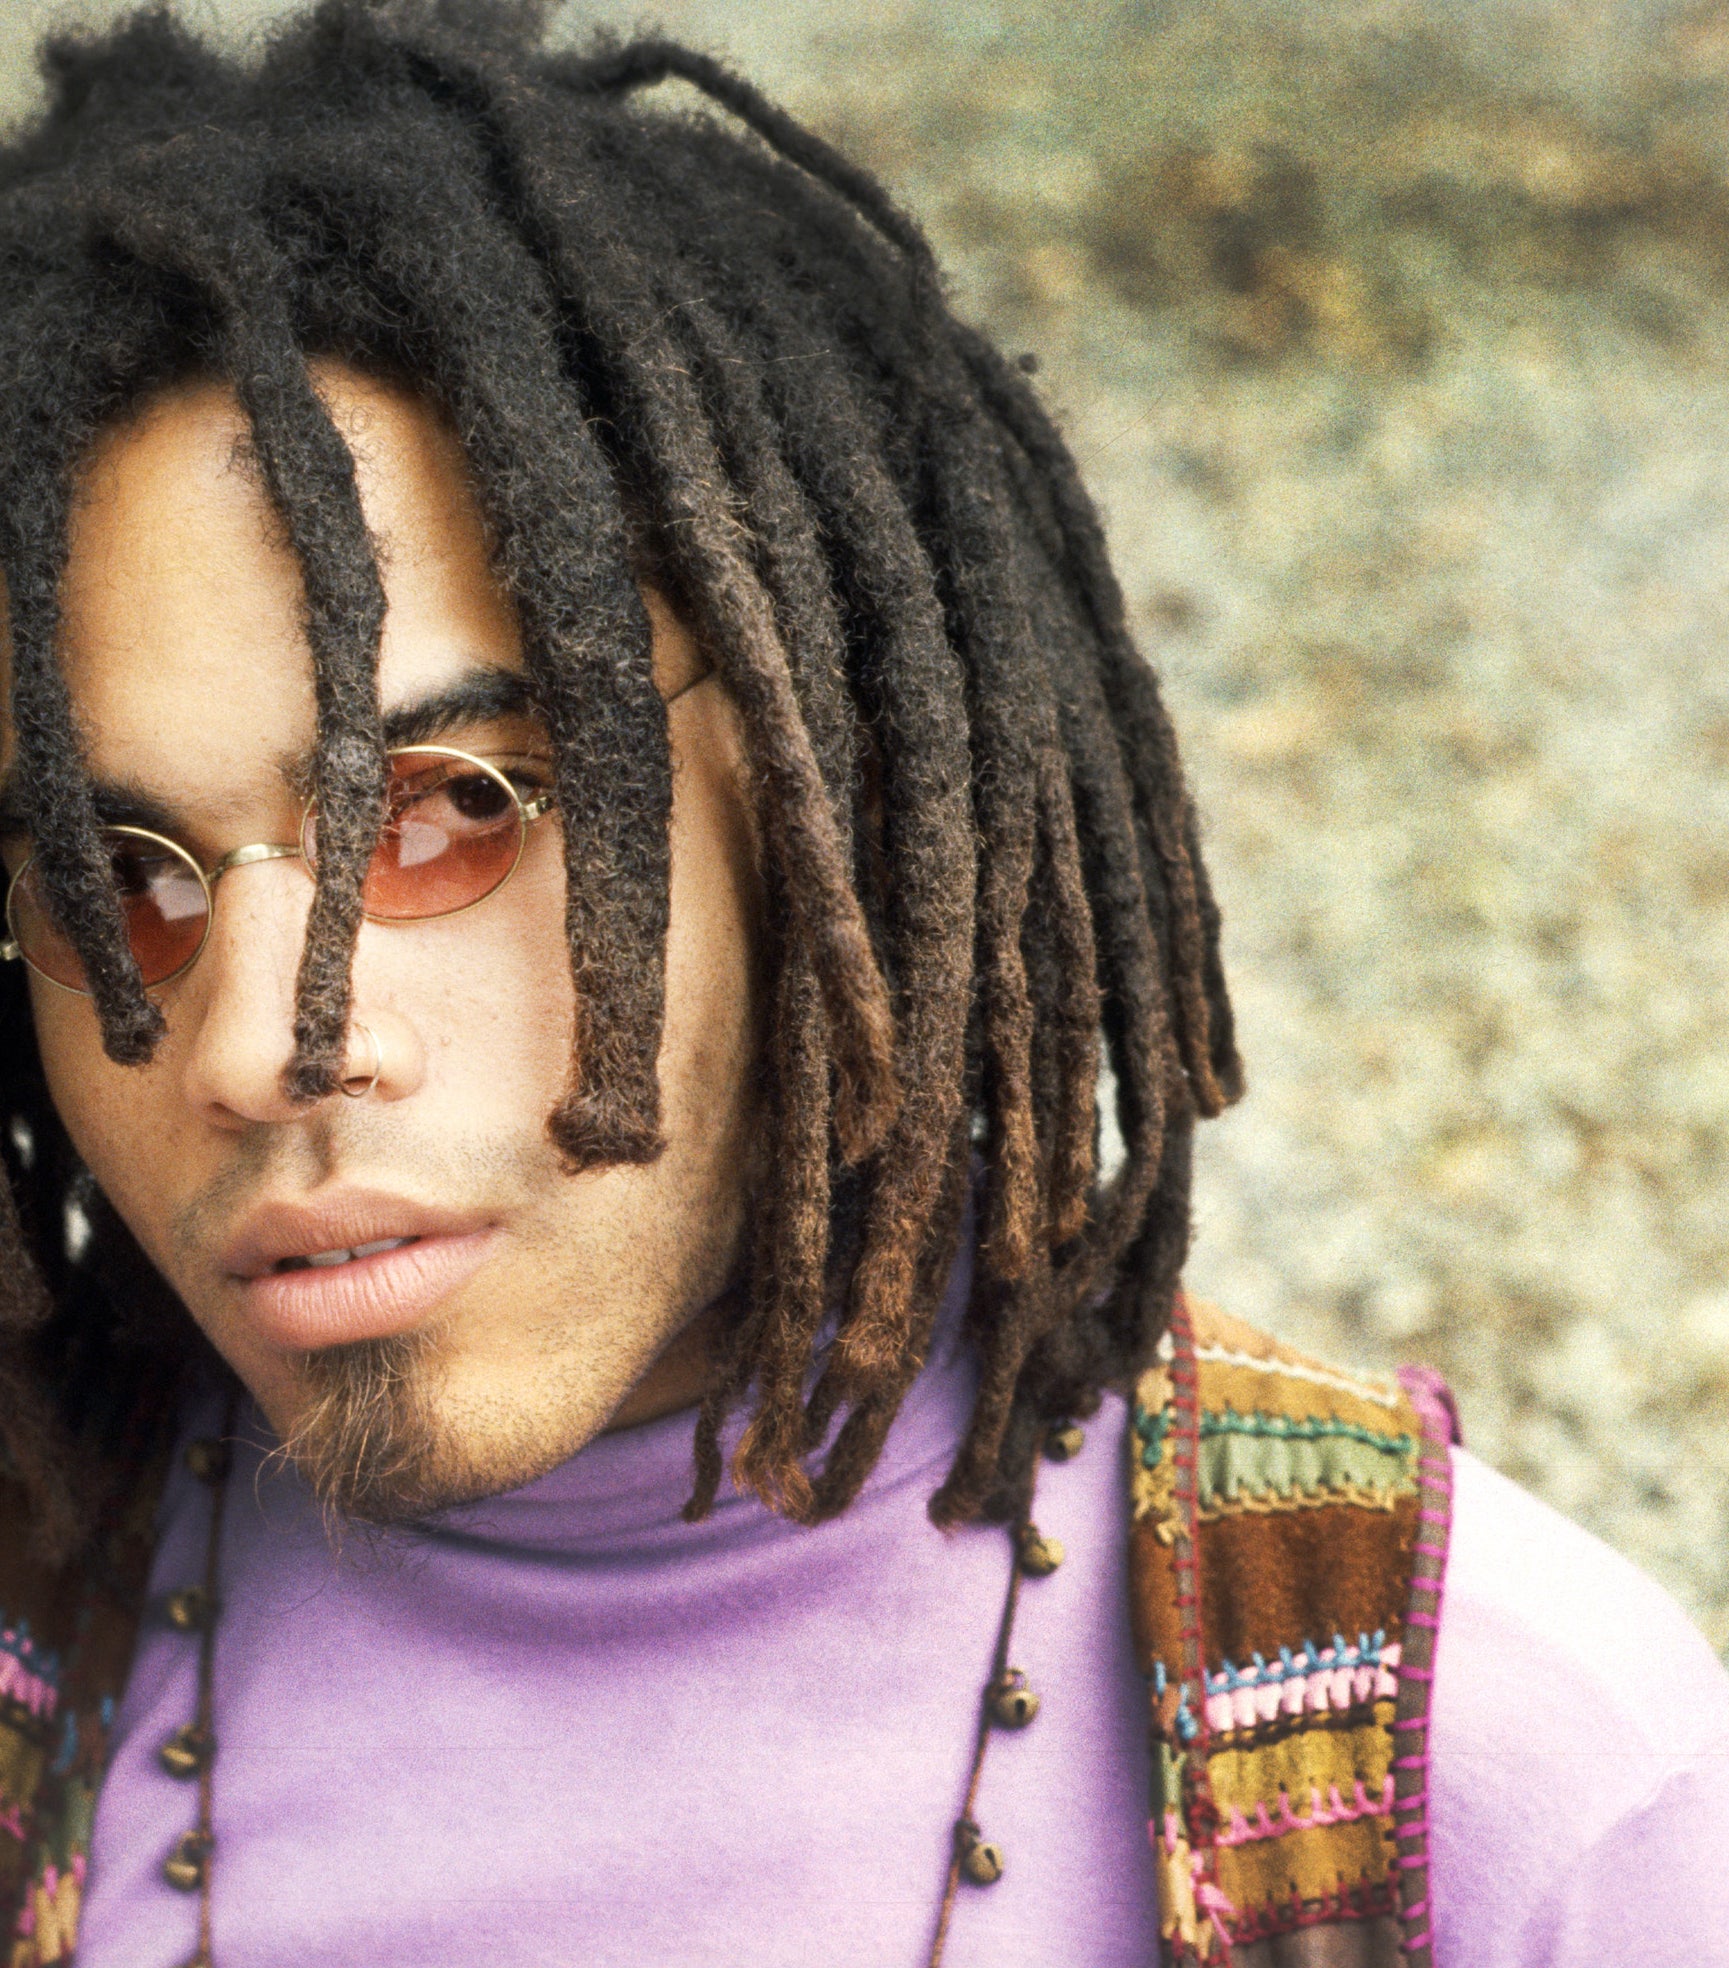 Lenny Kravitz with shorter dreads and sunglasses, wearing a purple turtleneck and striped vest